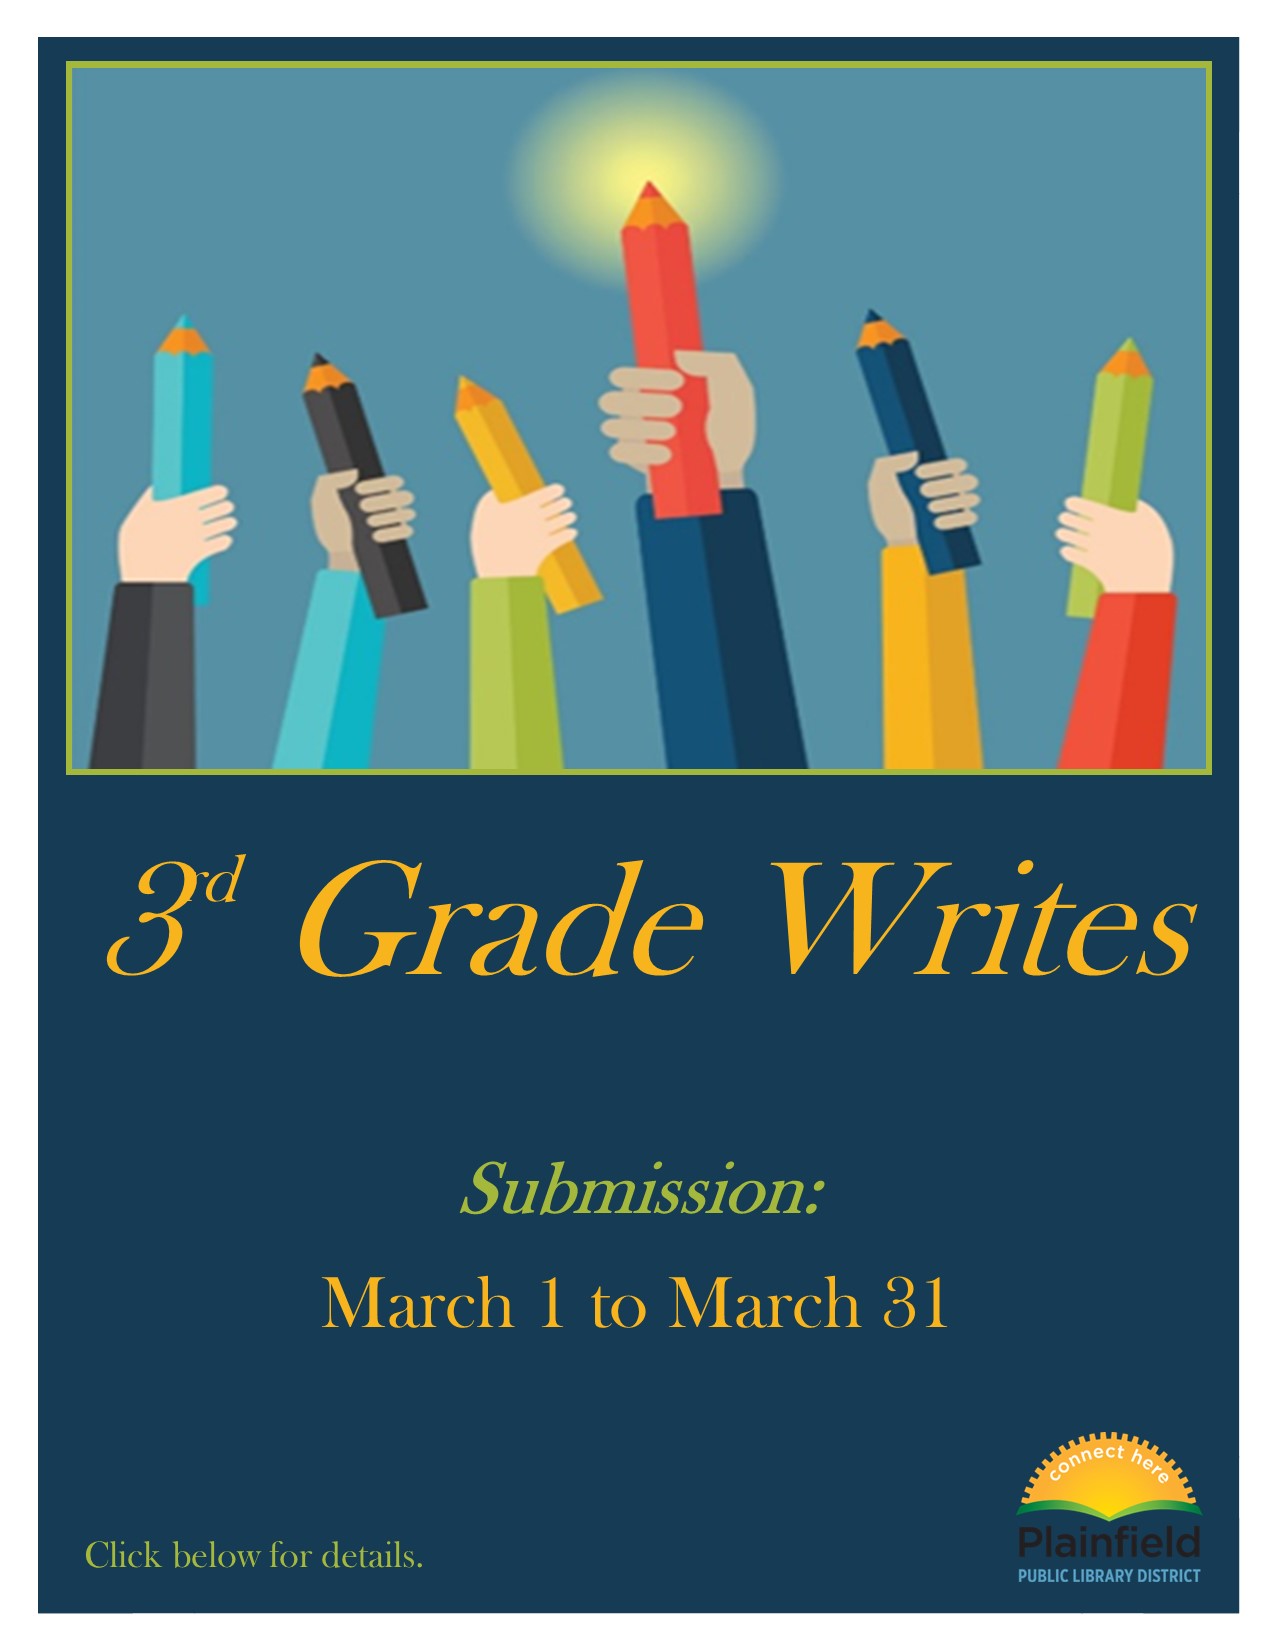 3rd Grade Writes submissions March 1 to March 31